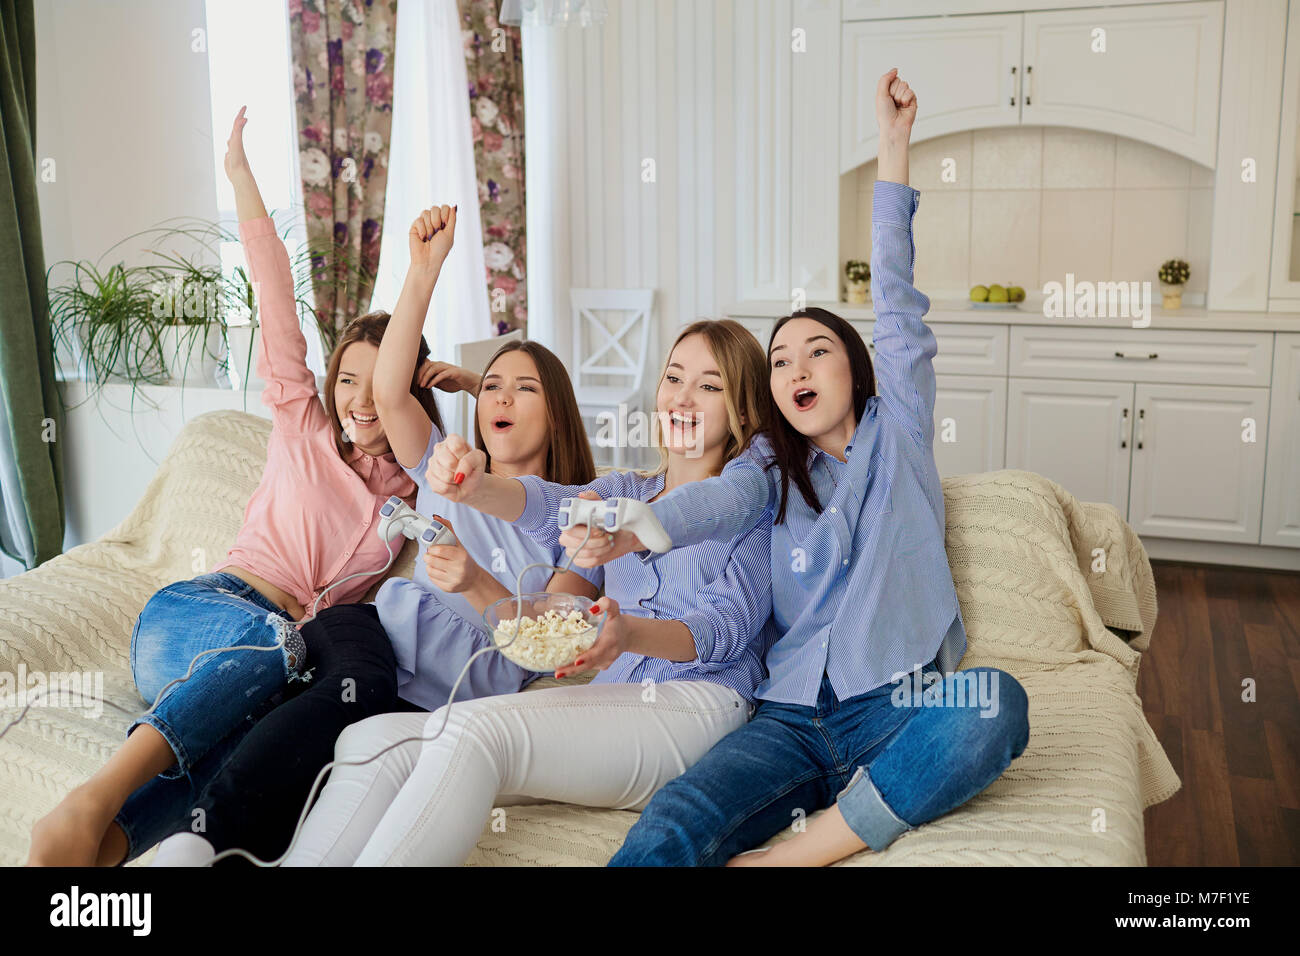 Girlfriends are playing video games sitting on the couch. Stock Photo